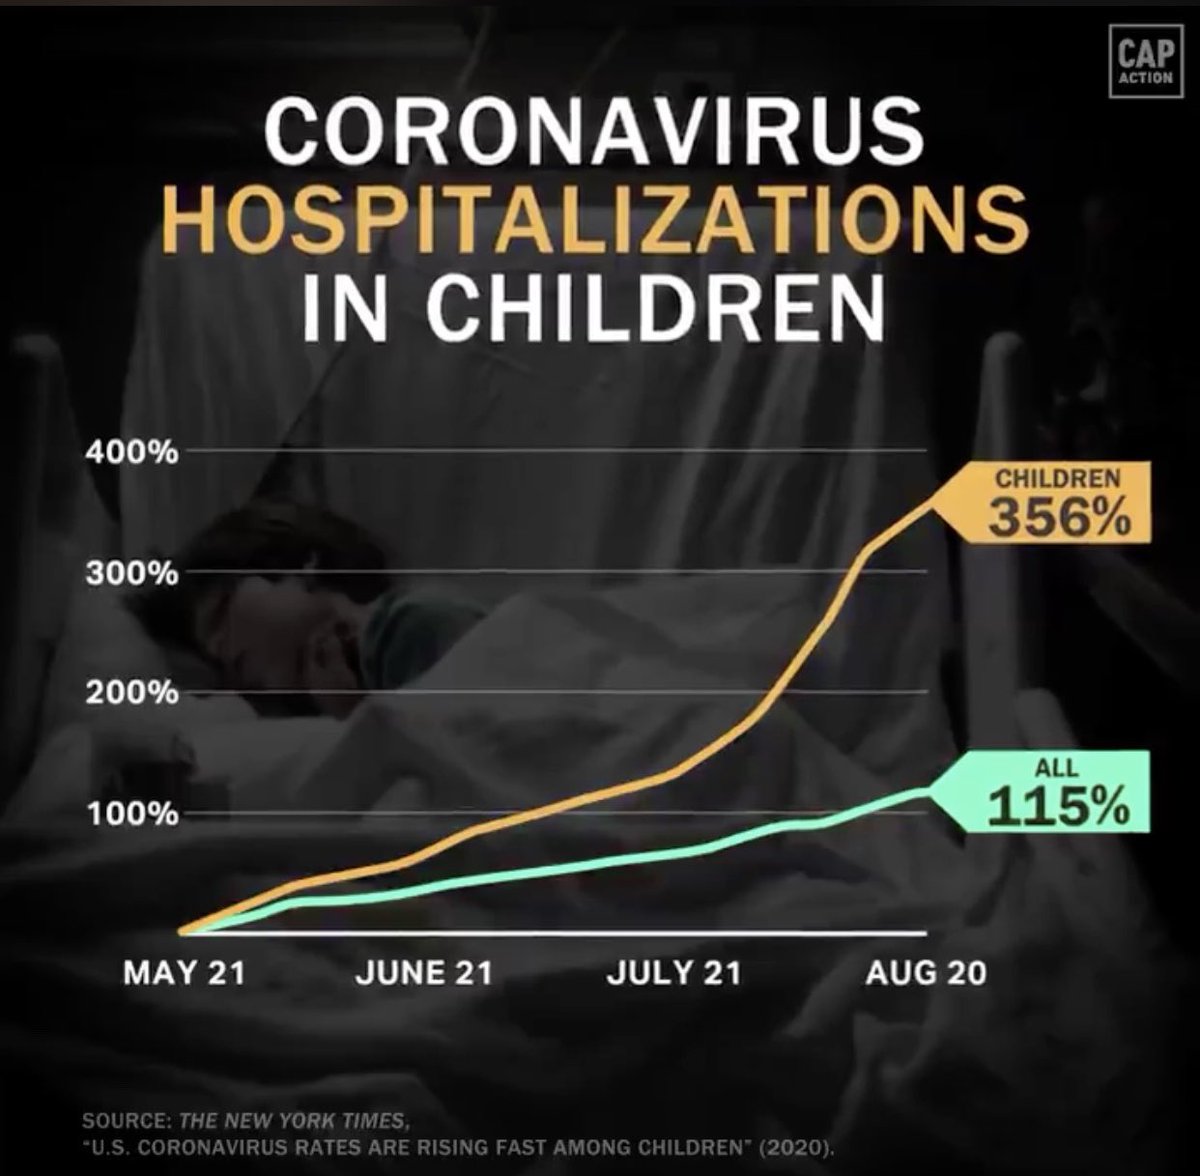 3) Here is the stat of 356% increase for  #COVID19 hospitalizations in kids from video above.